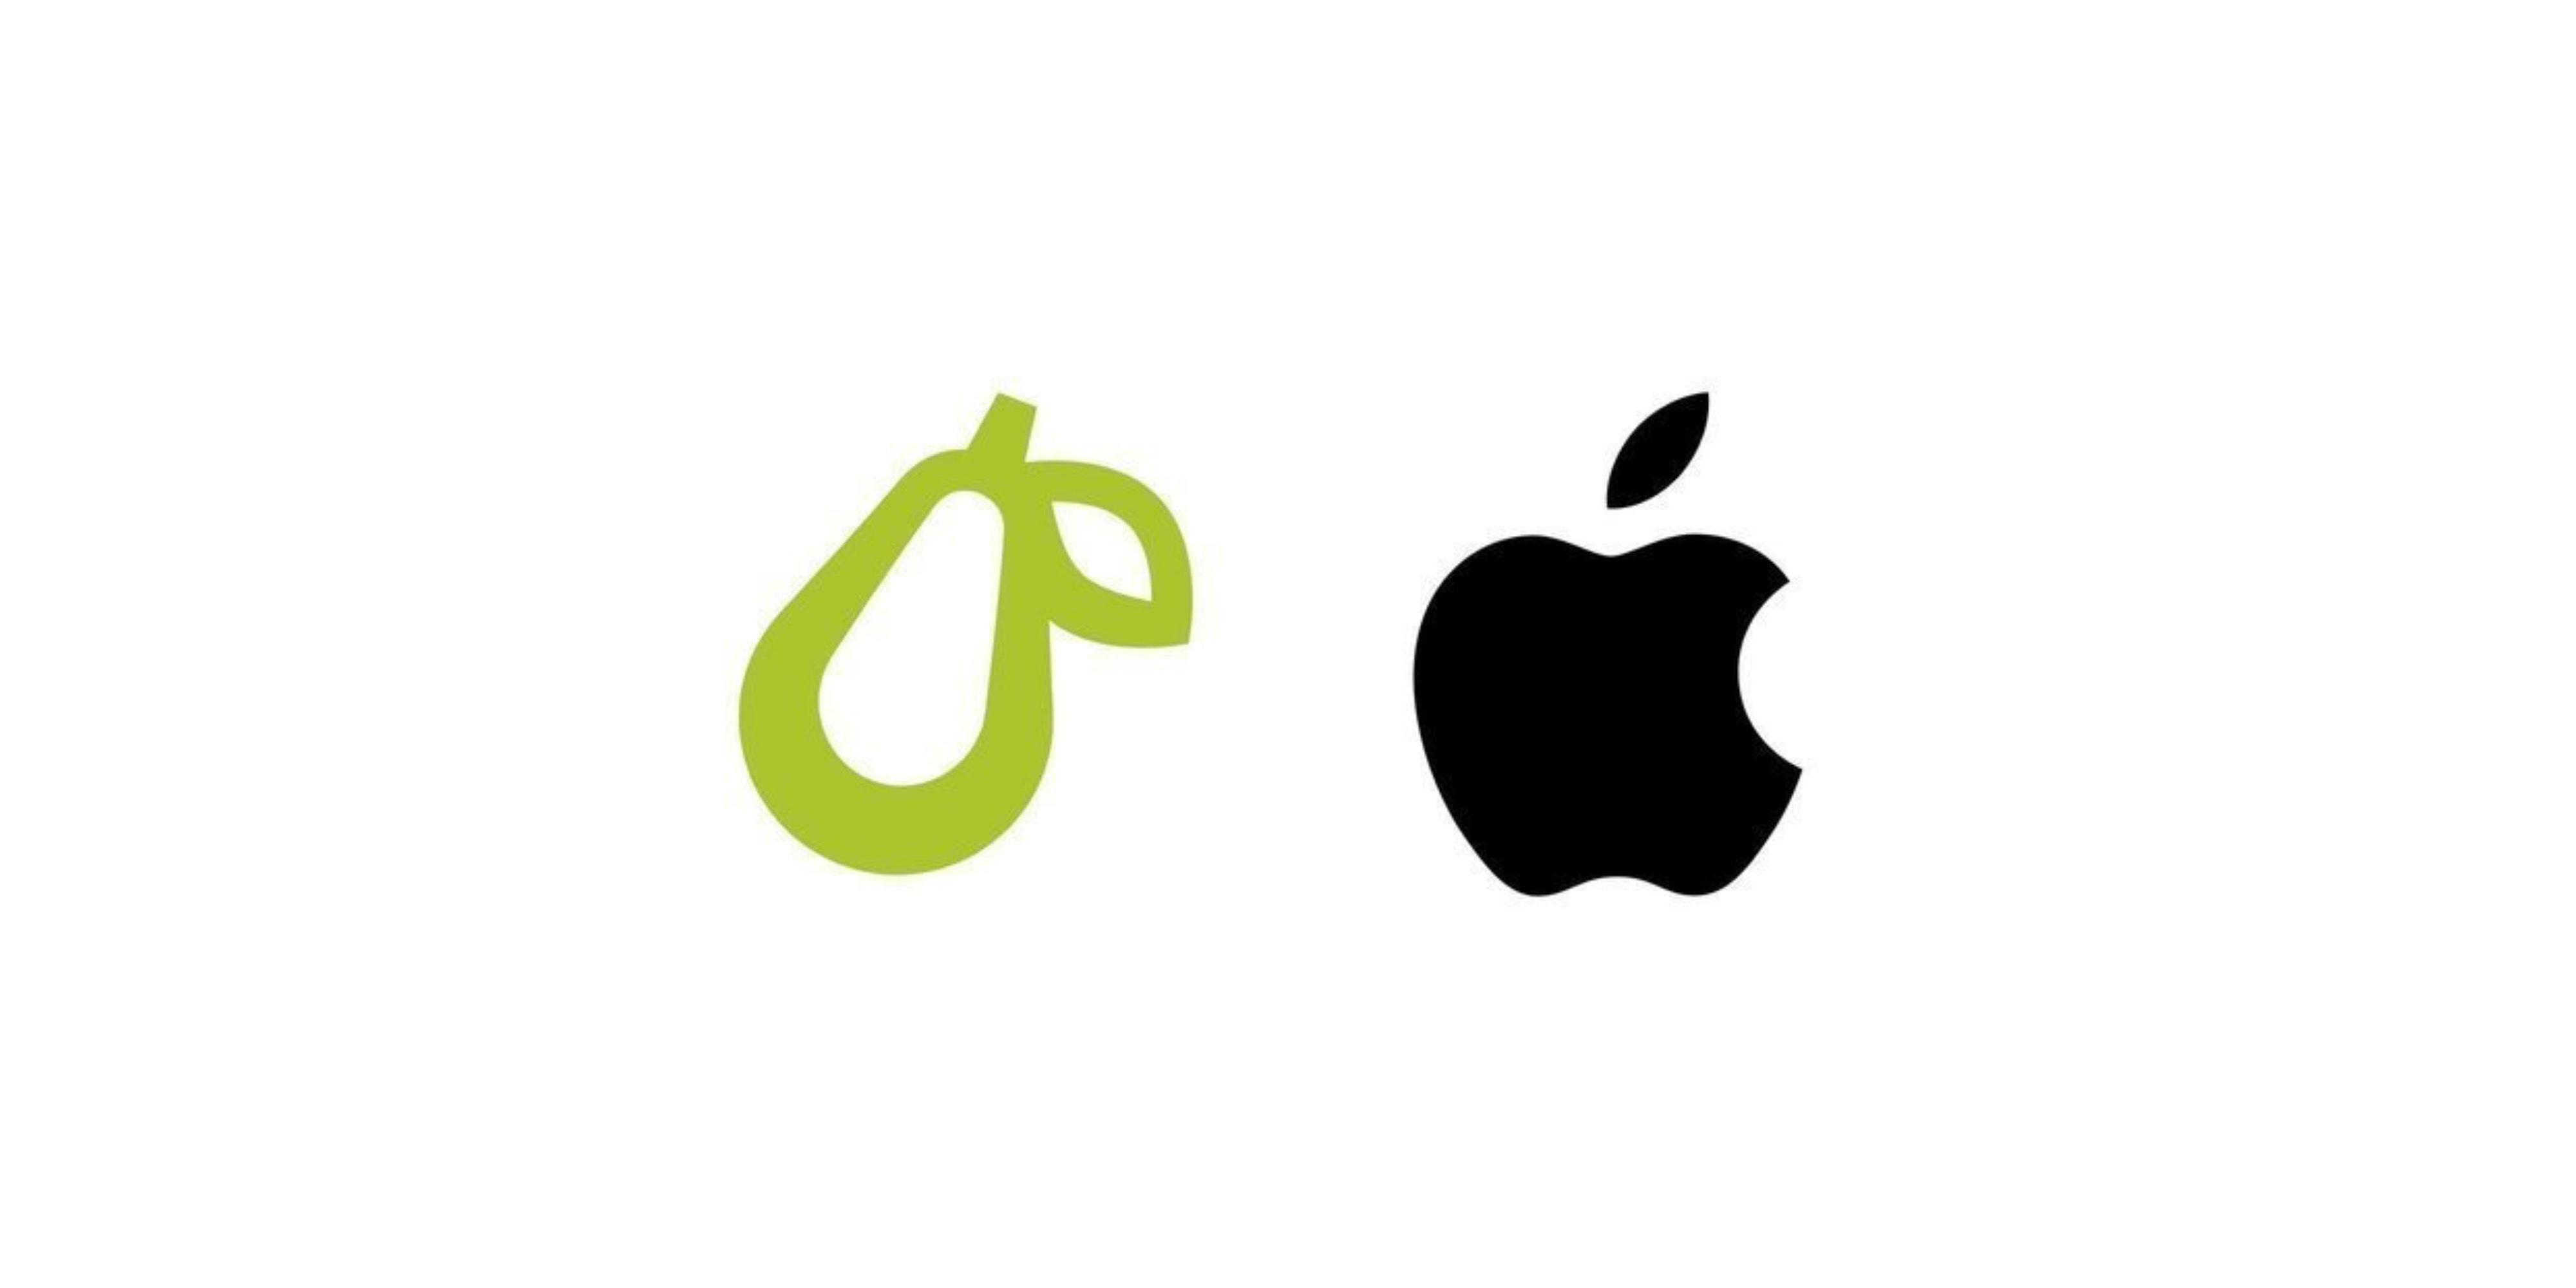 Apple takes legal action against meal planning service with a pear-shaped logo - 9to5Mac